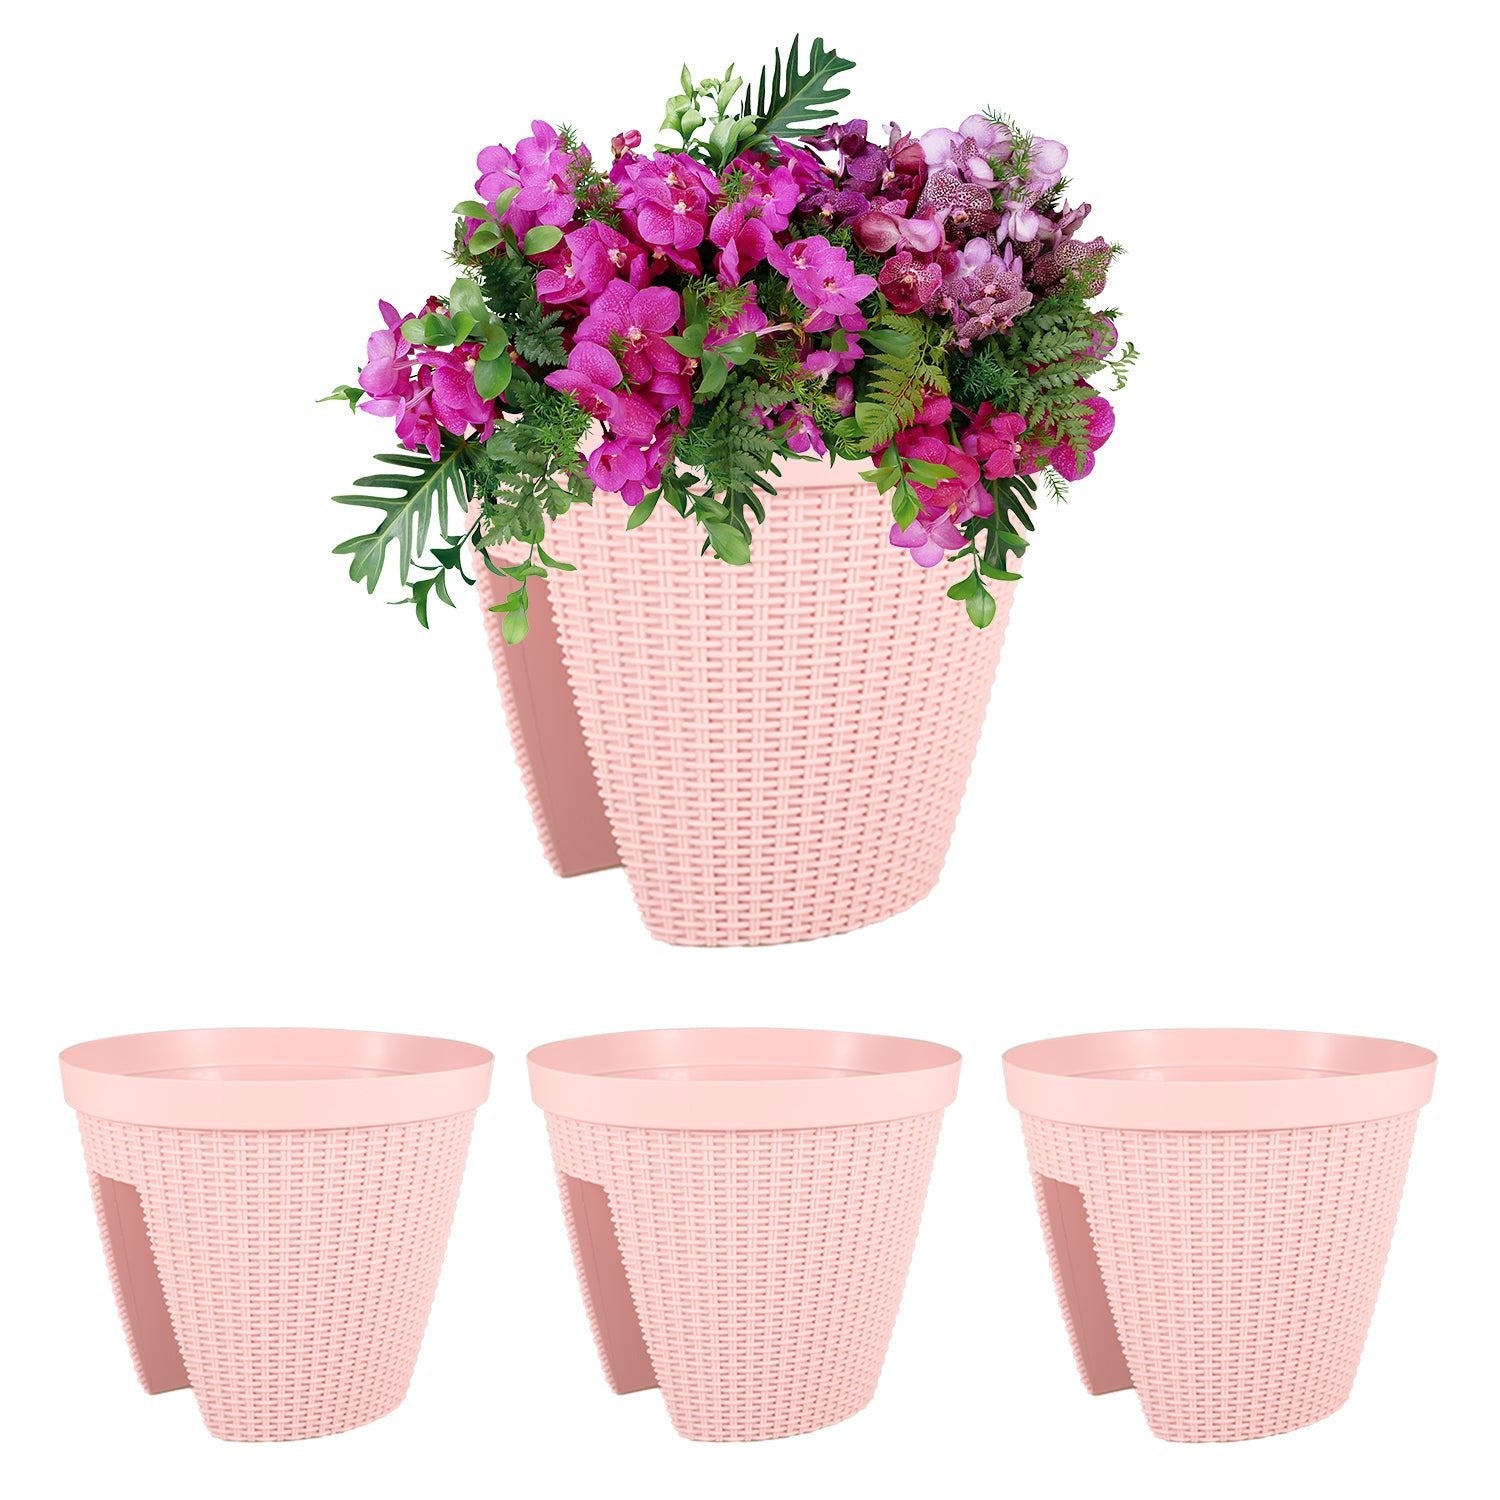 12'' Balcony Rattan Pattern Railing Planter Box with Drainage Holes and Adjustable Brackets- Set of 4  Aoodor  Pink  